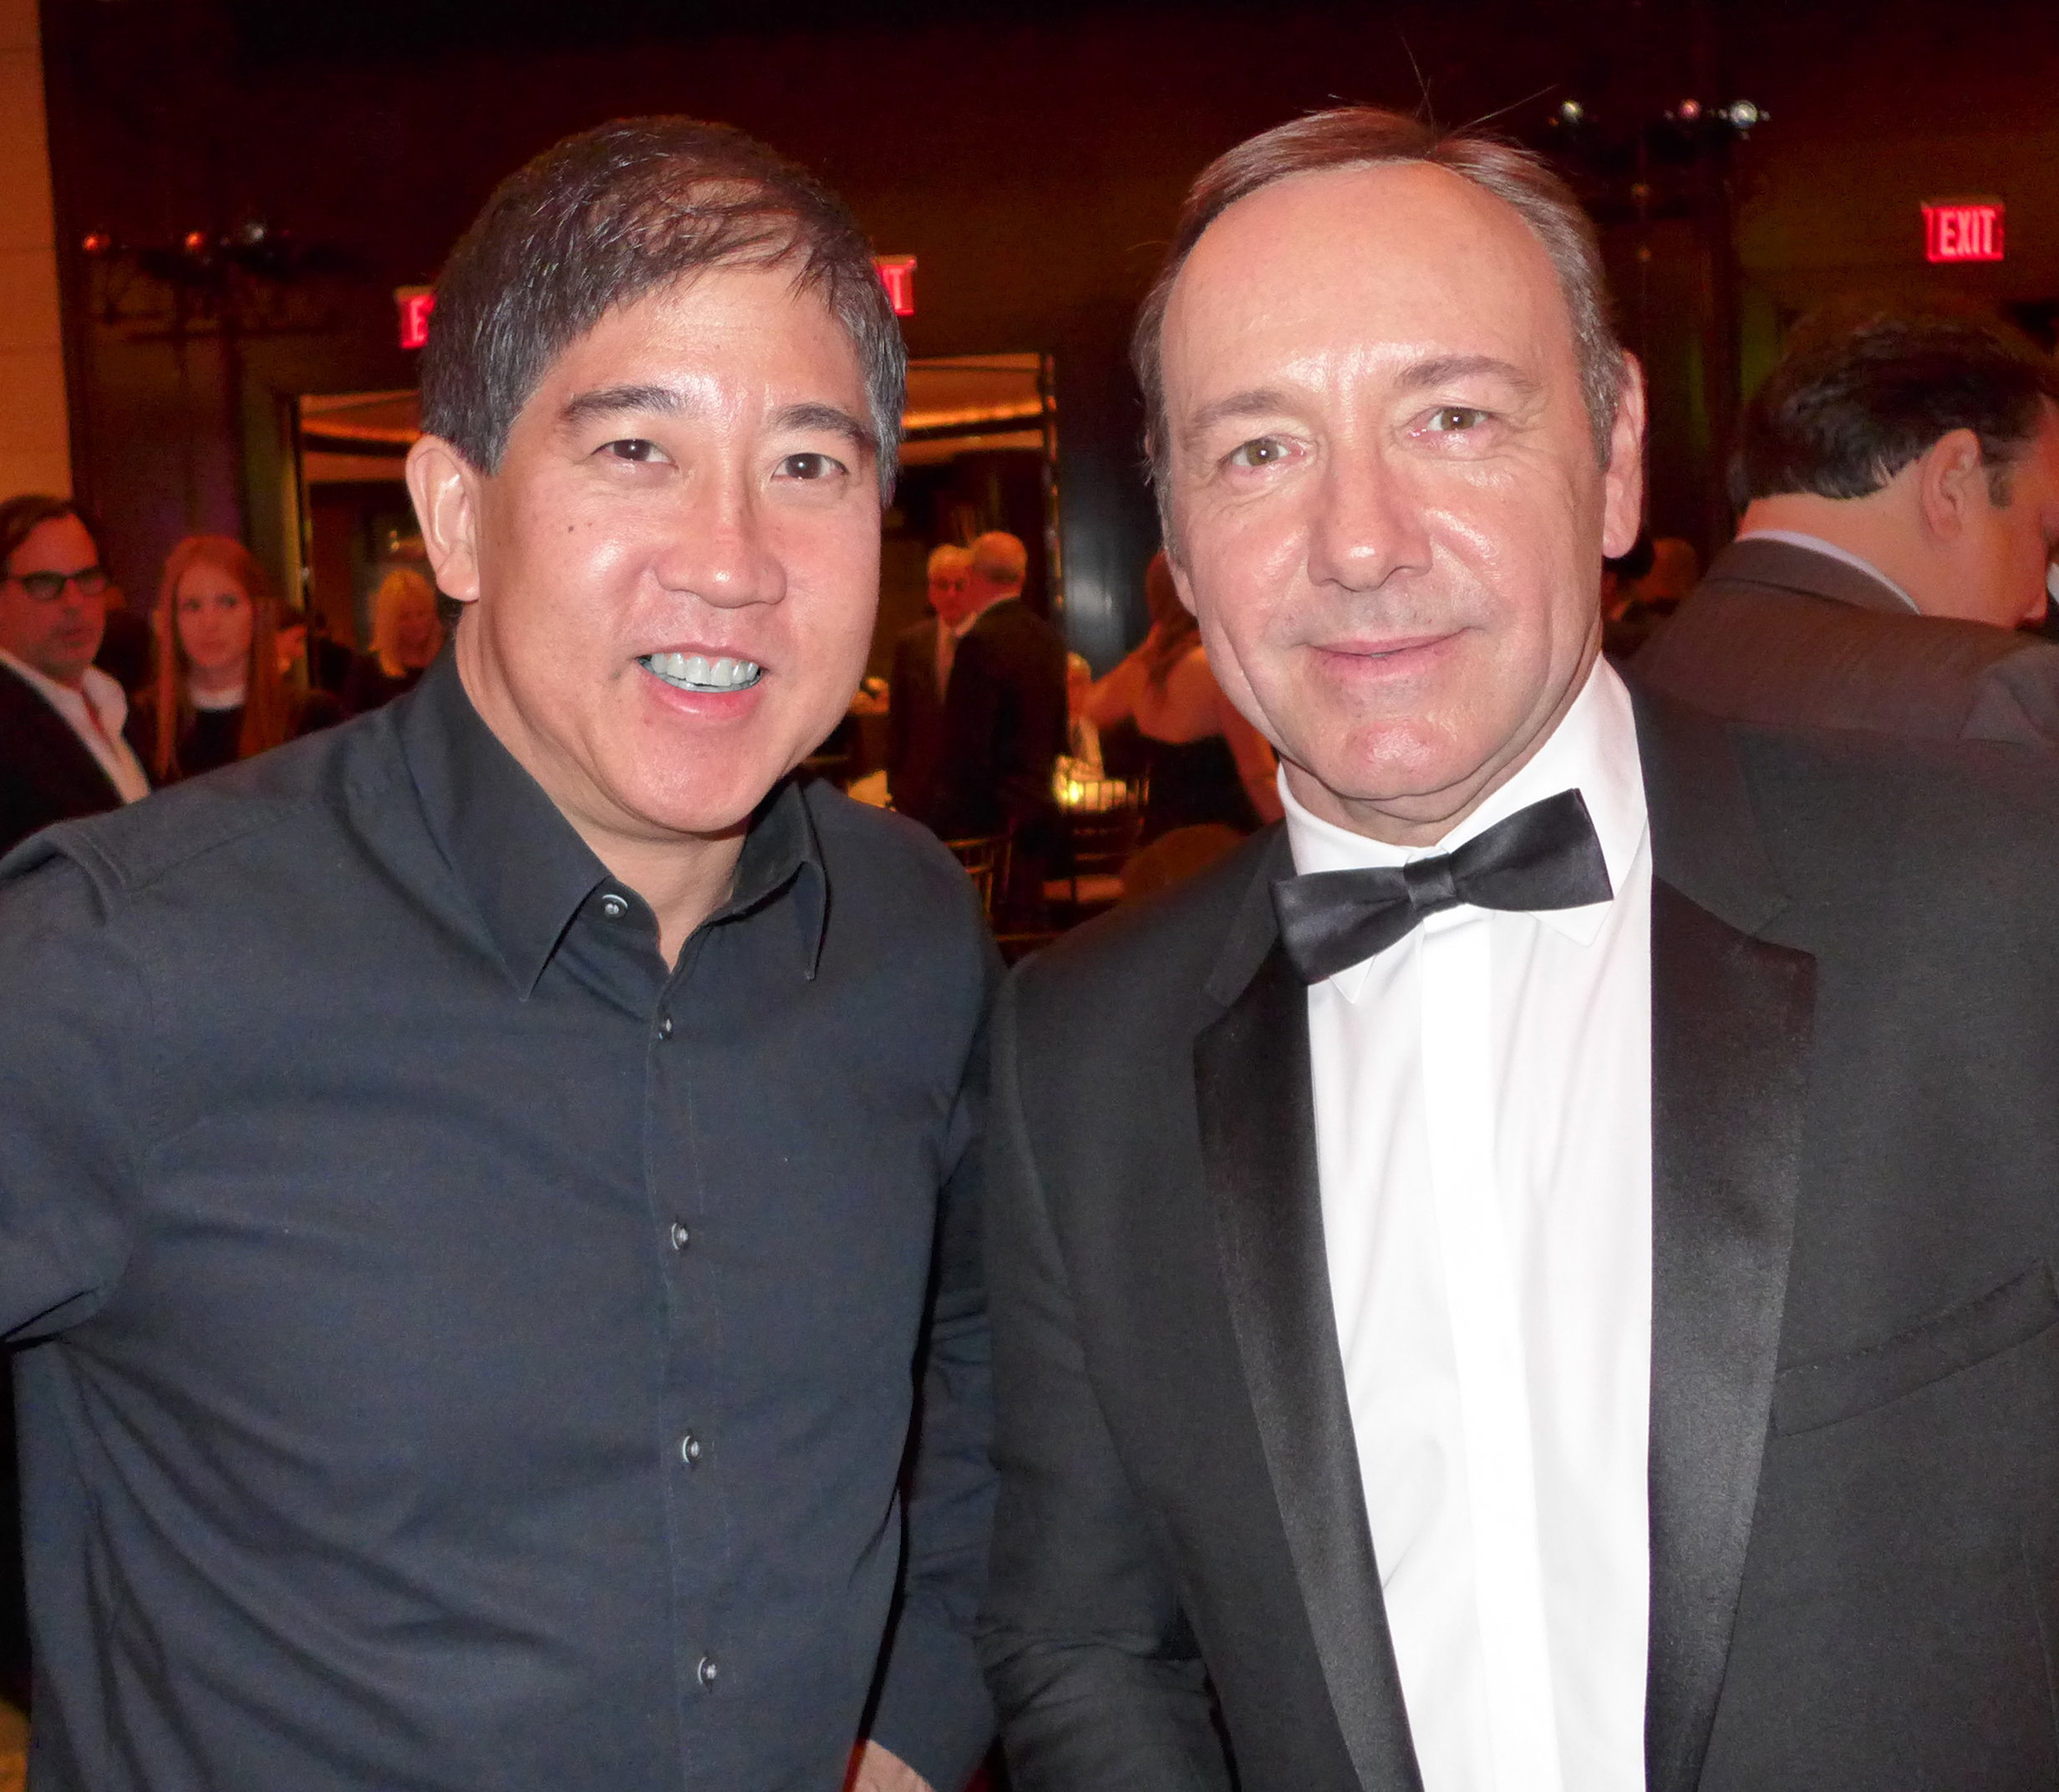 Stephen Mao-Kevin Spacey at the 25th Annual Revlon Rainforest Gala in New York City.